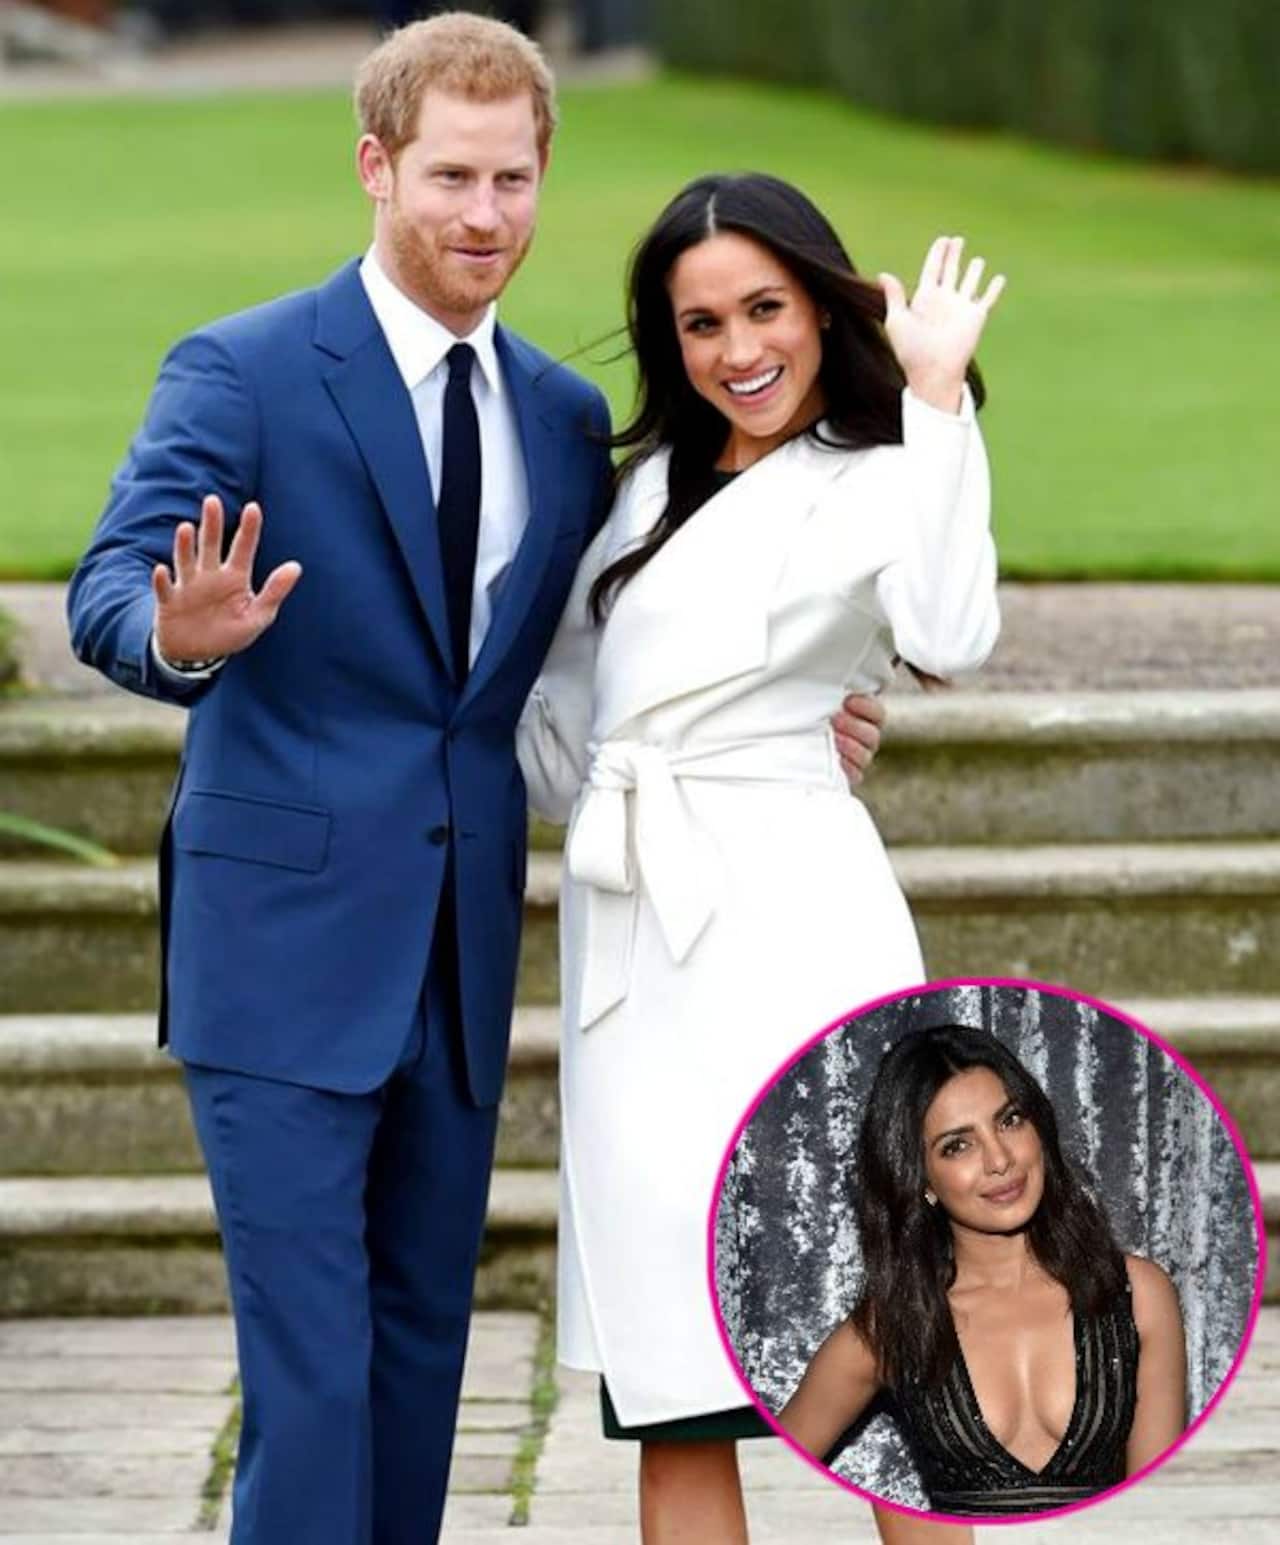 It's Confirmed! Priyanka Chopra to attend Meghan Markle and Prince Harry's royal wedding on May 19